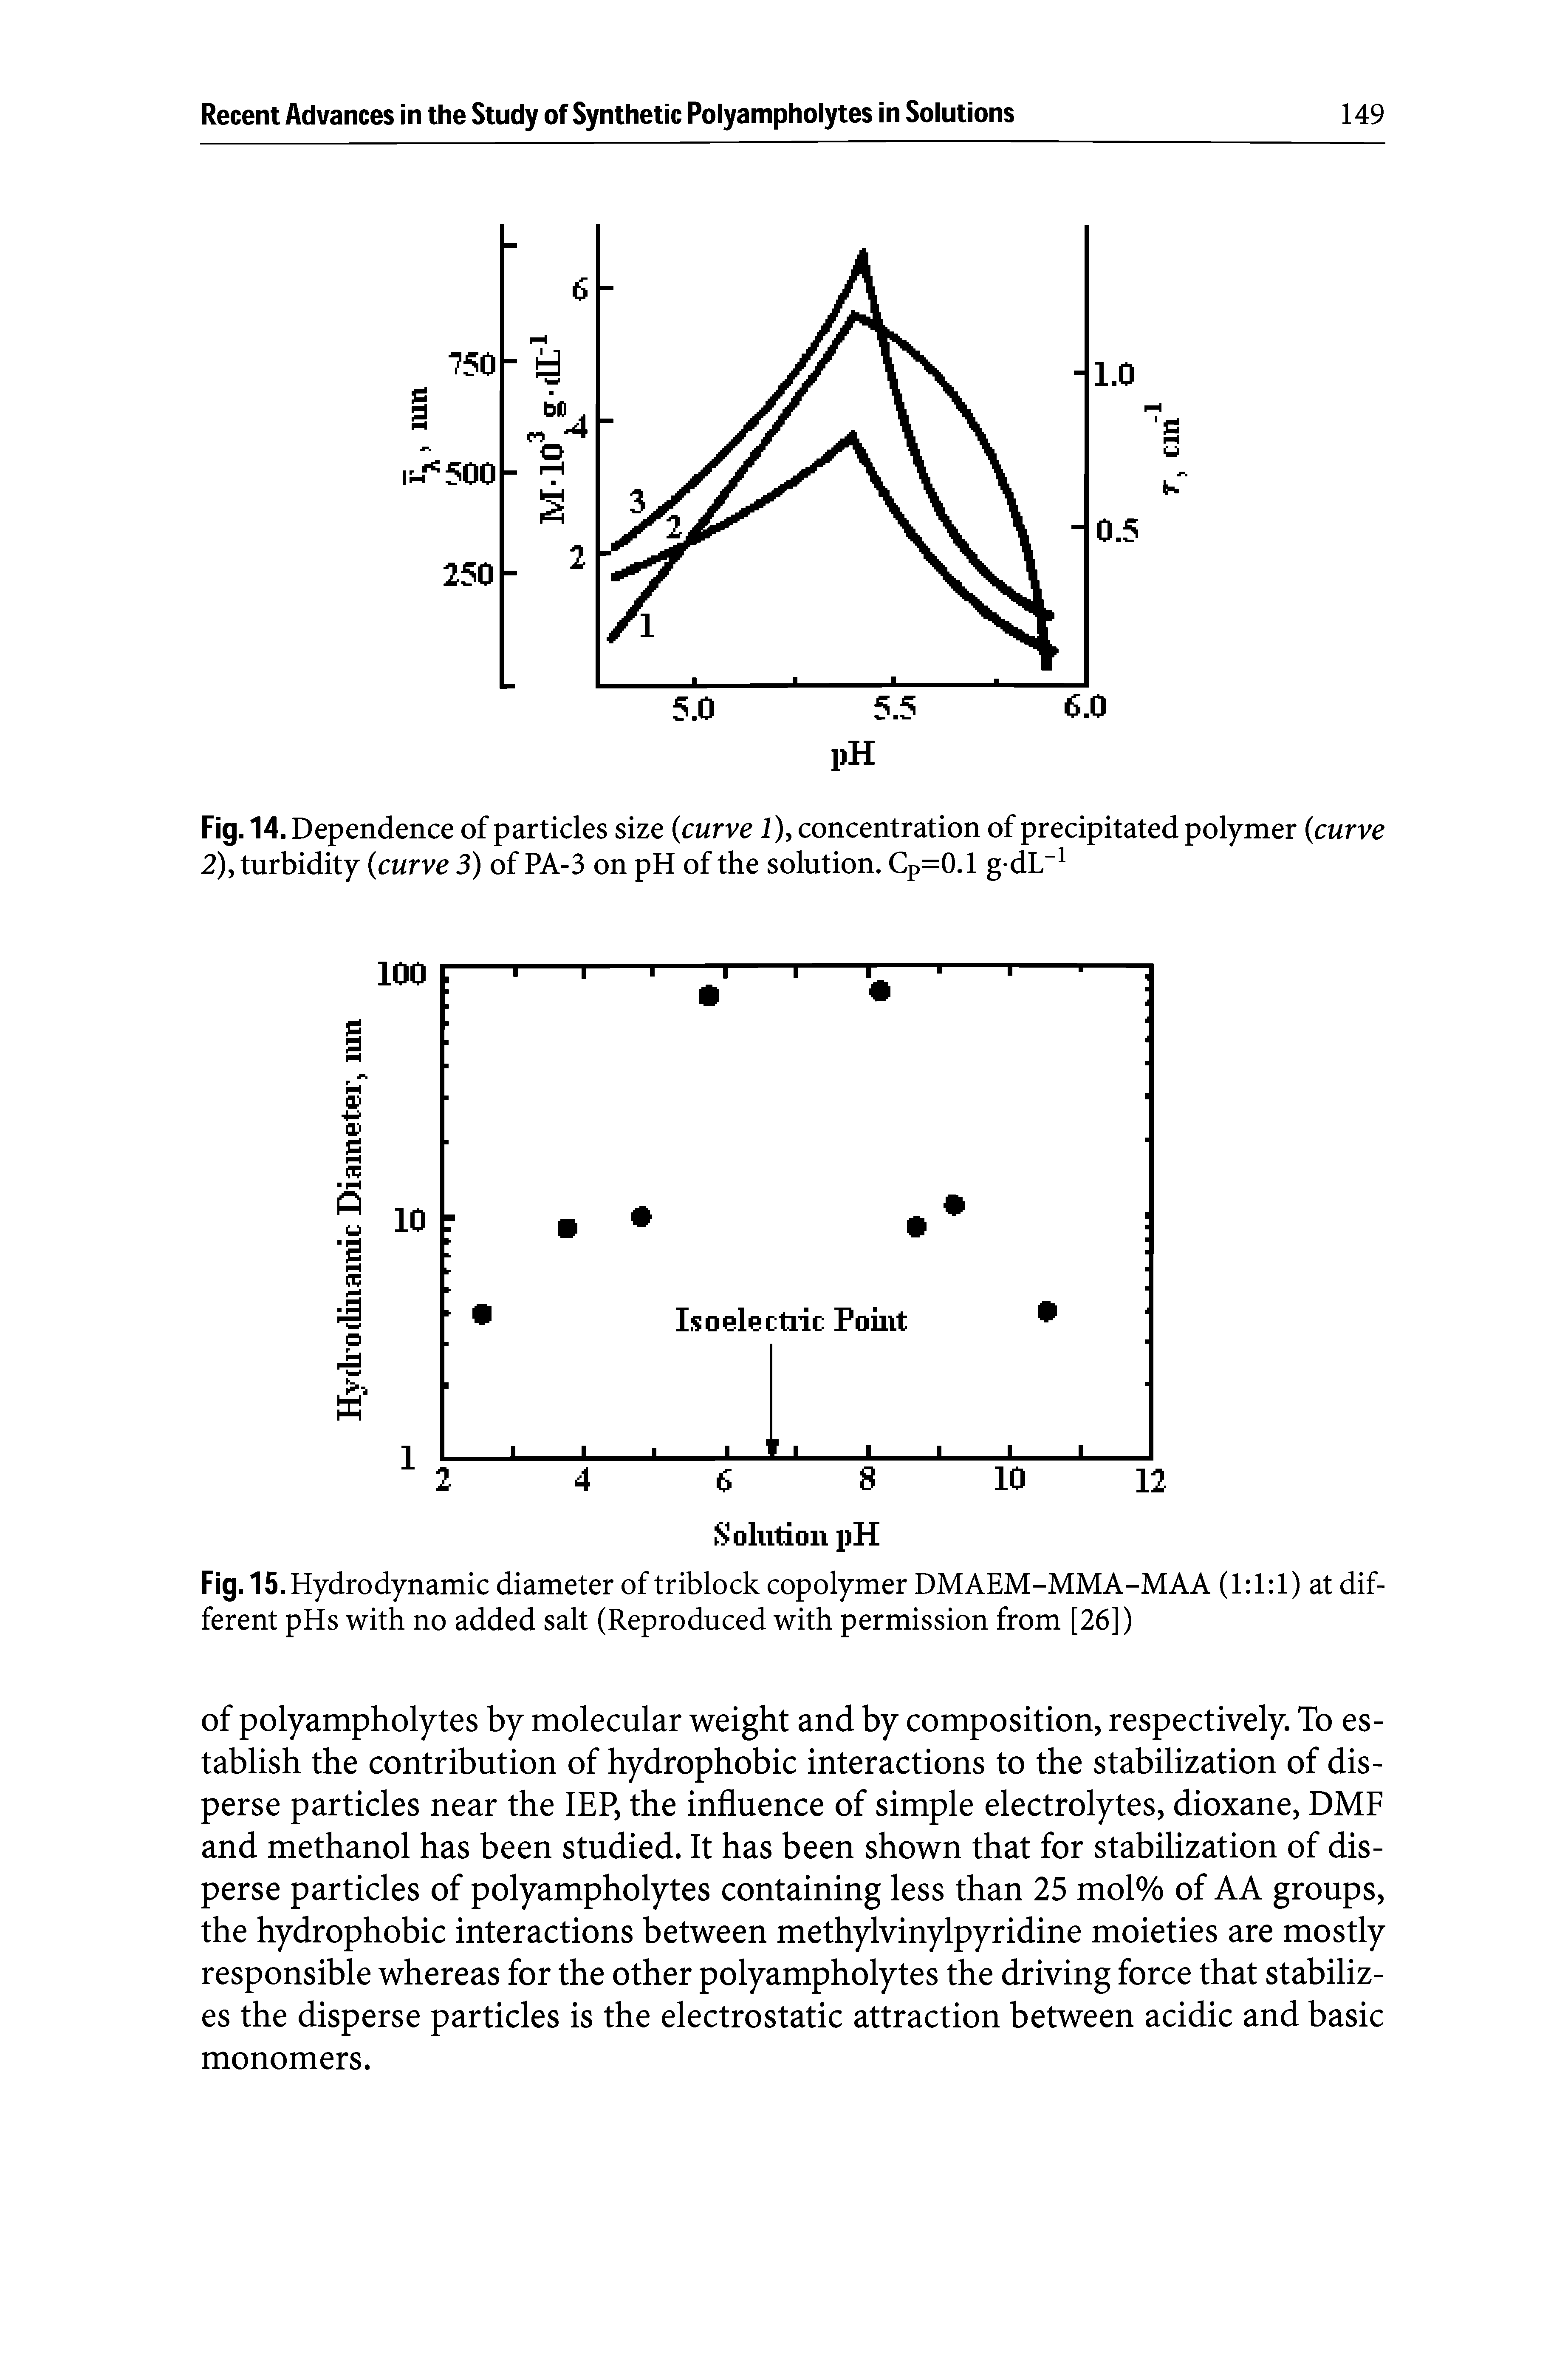 Fig. 14. Dependence of particles size (curve 1), concentration of precipitated polymer (curve 2), turbidity (curve 3) of PA-3 on pH of the solution. Cp=0.1 g dL" ...